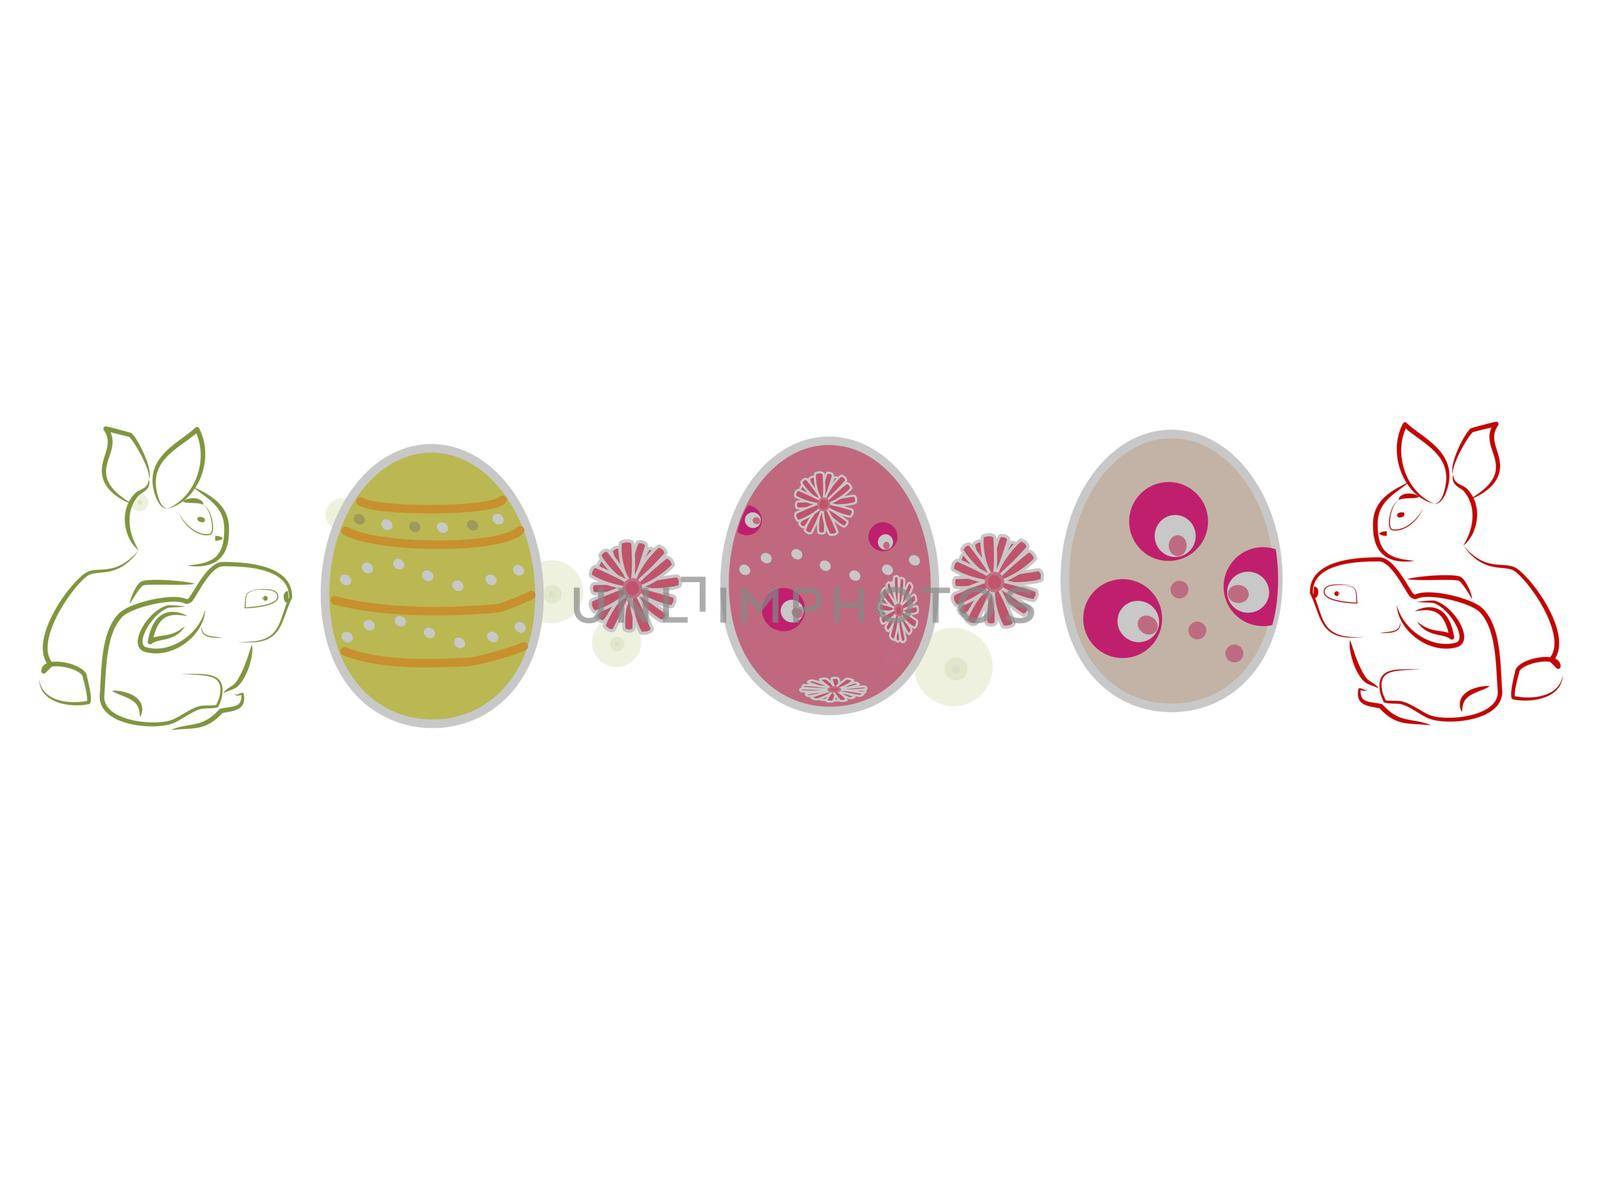 Happy easter on white background - 3d rendering by mariephotos